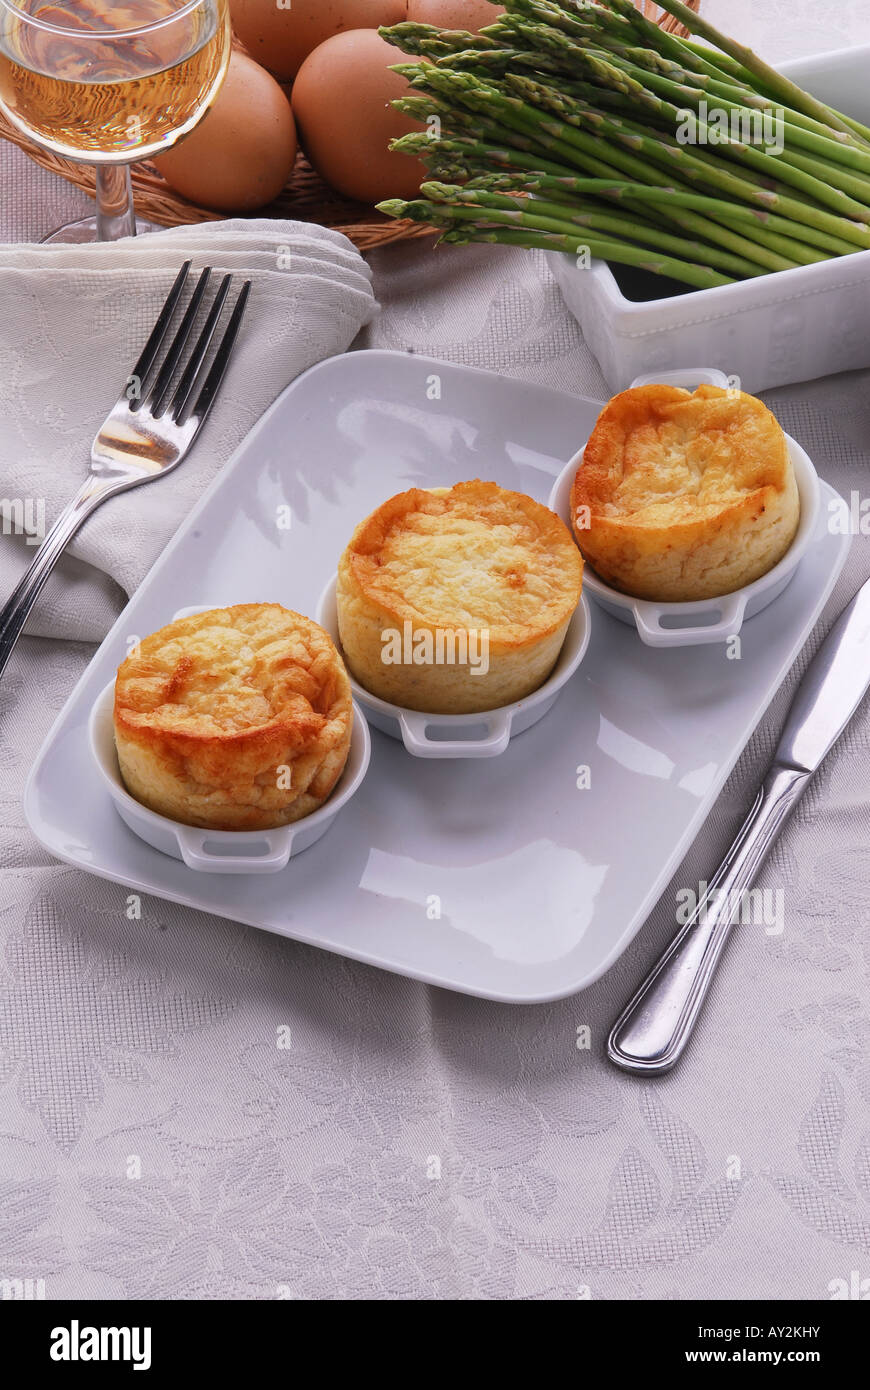 Souffles with asparagues - Vegetarian kitchen Stock Photo